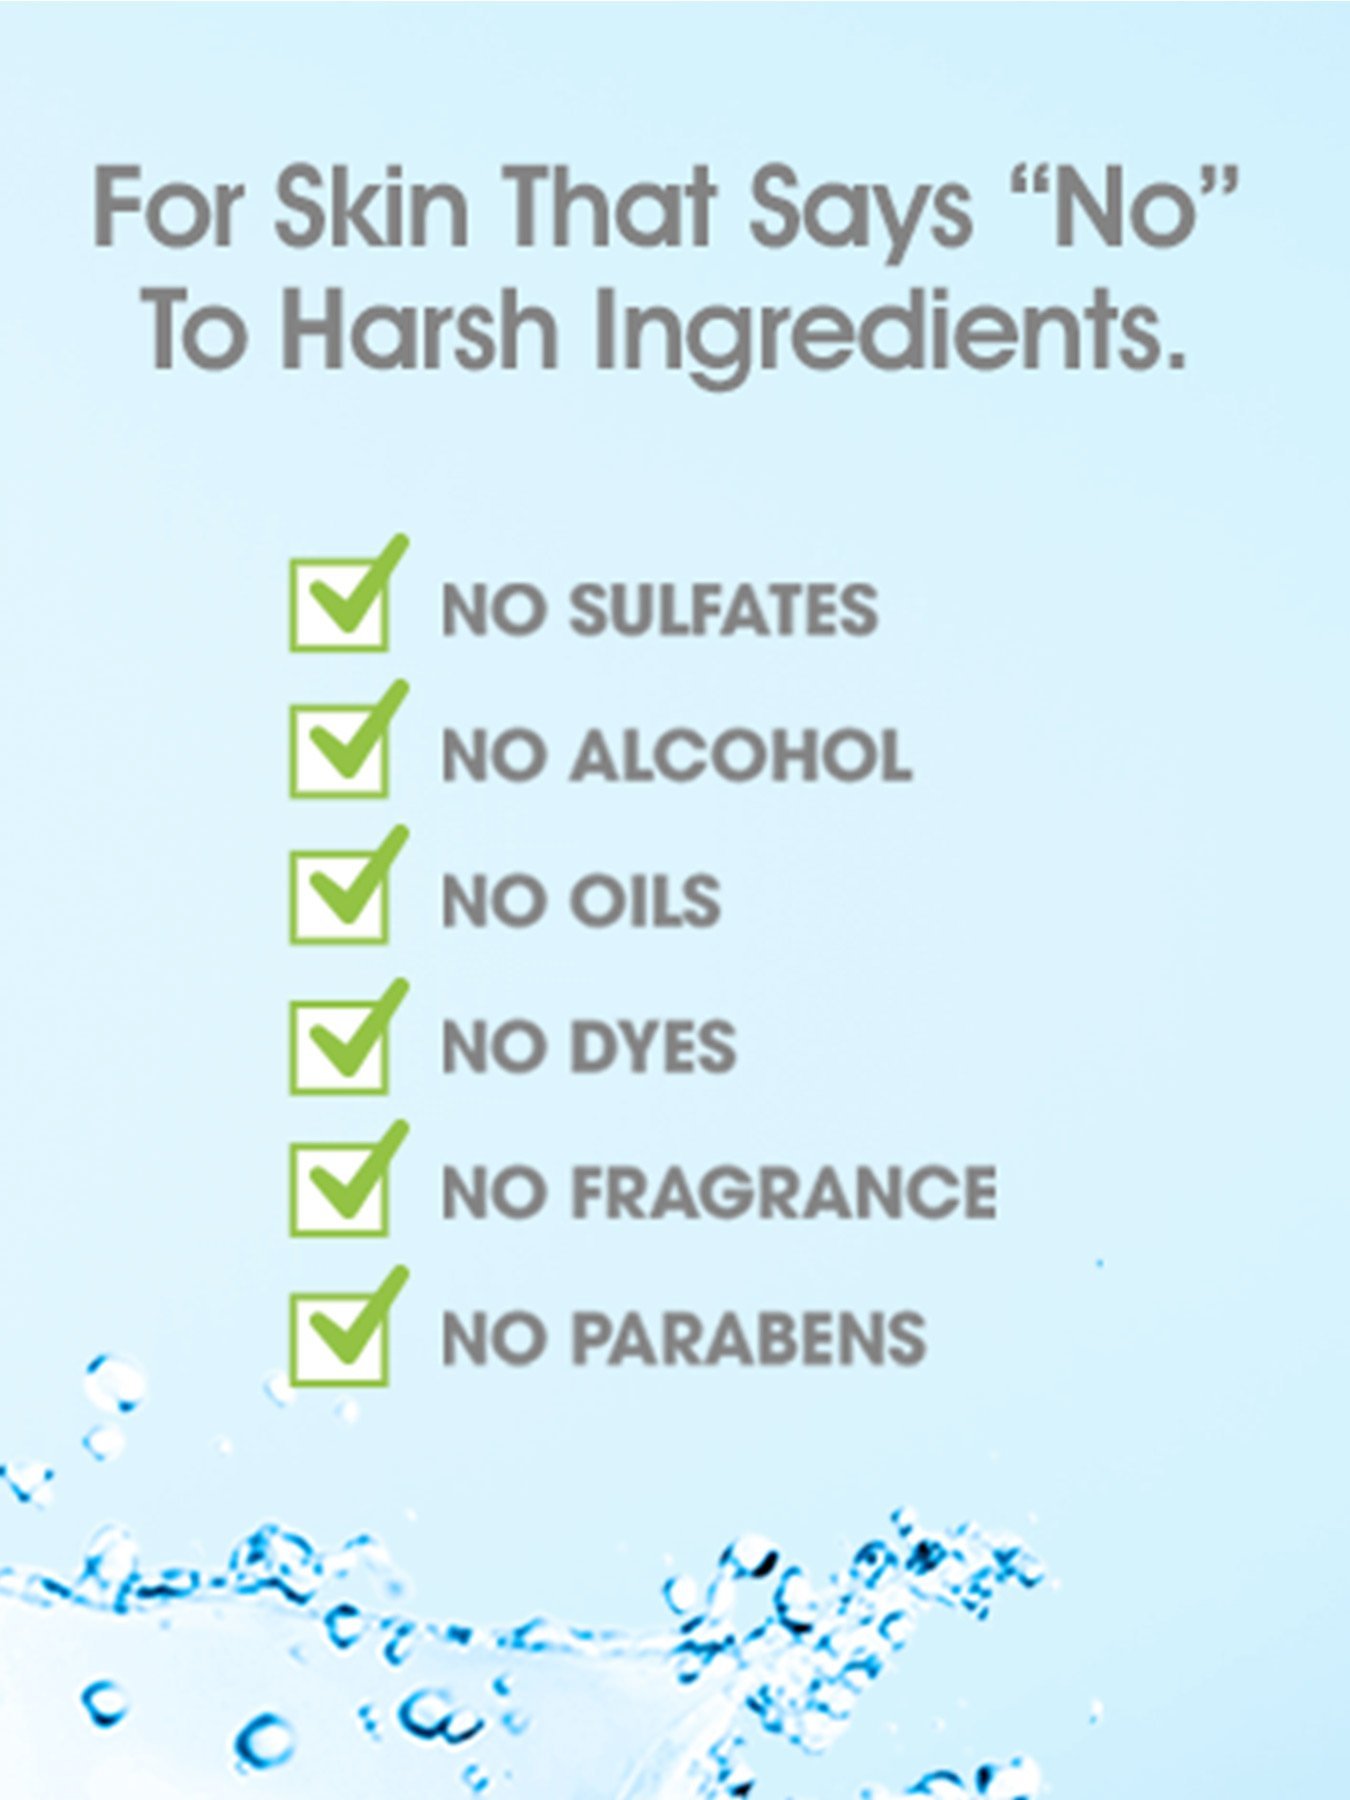 For Skin that says "No" to harsh ingredients. No sulfates, no alcohol, no oils, no dyes, no fragrance, no parabens.